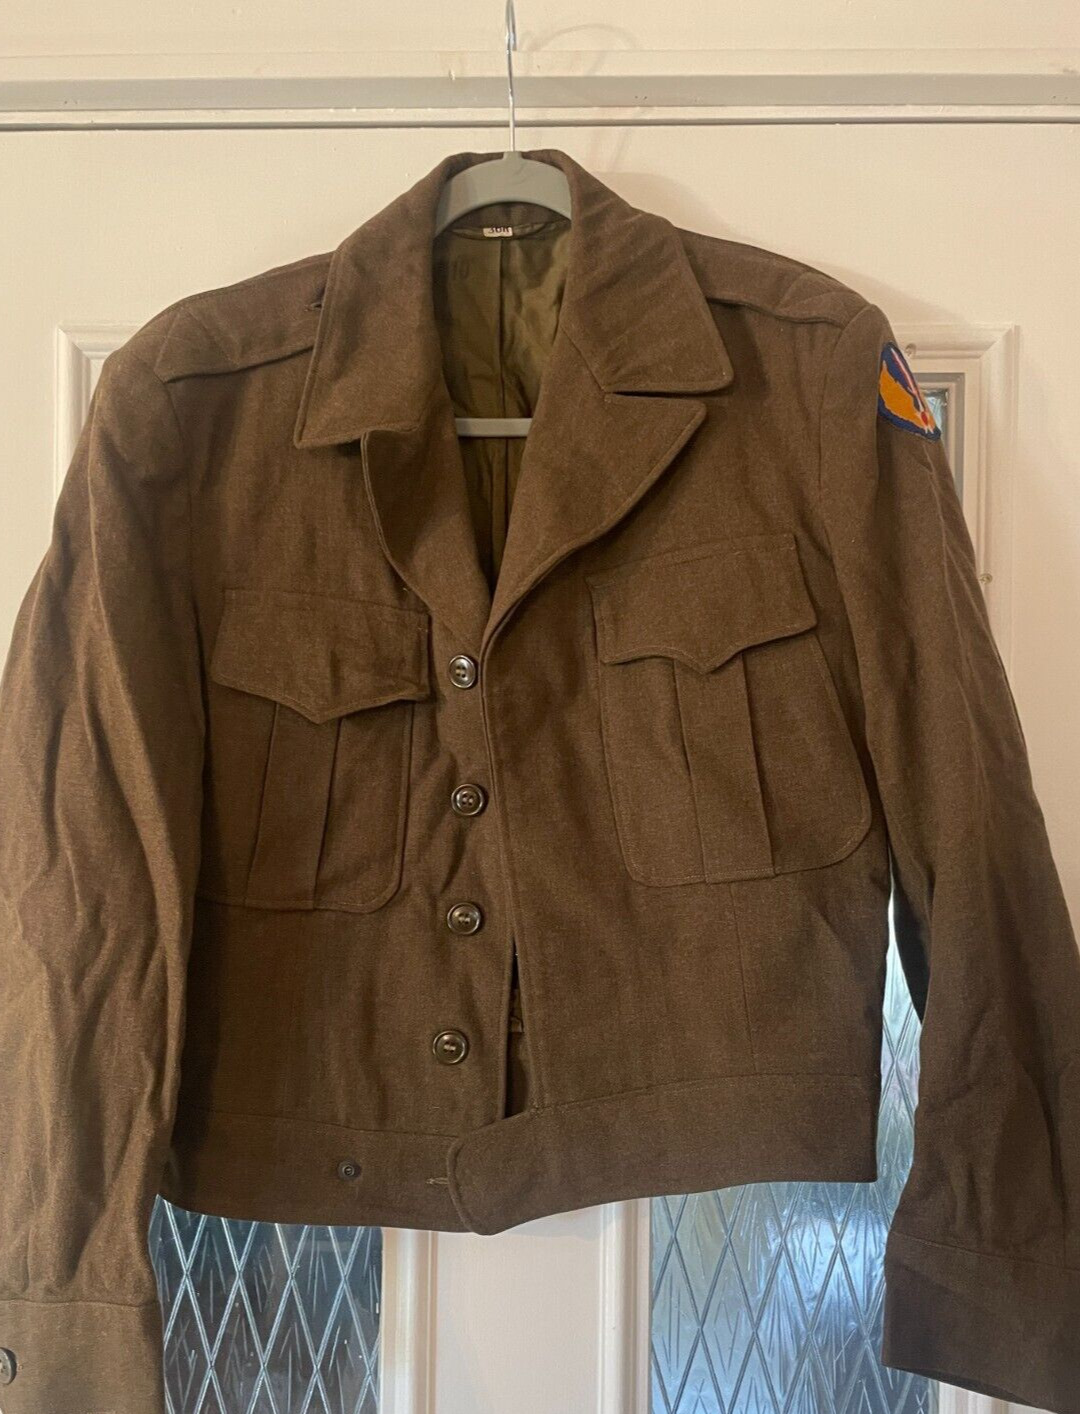 VTG WWII Military Wool Jacket Men's 36R US Army Air Forces Europe  Green